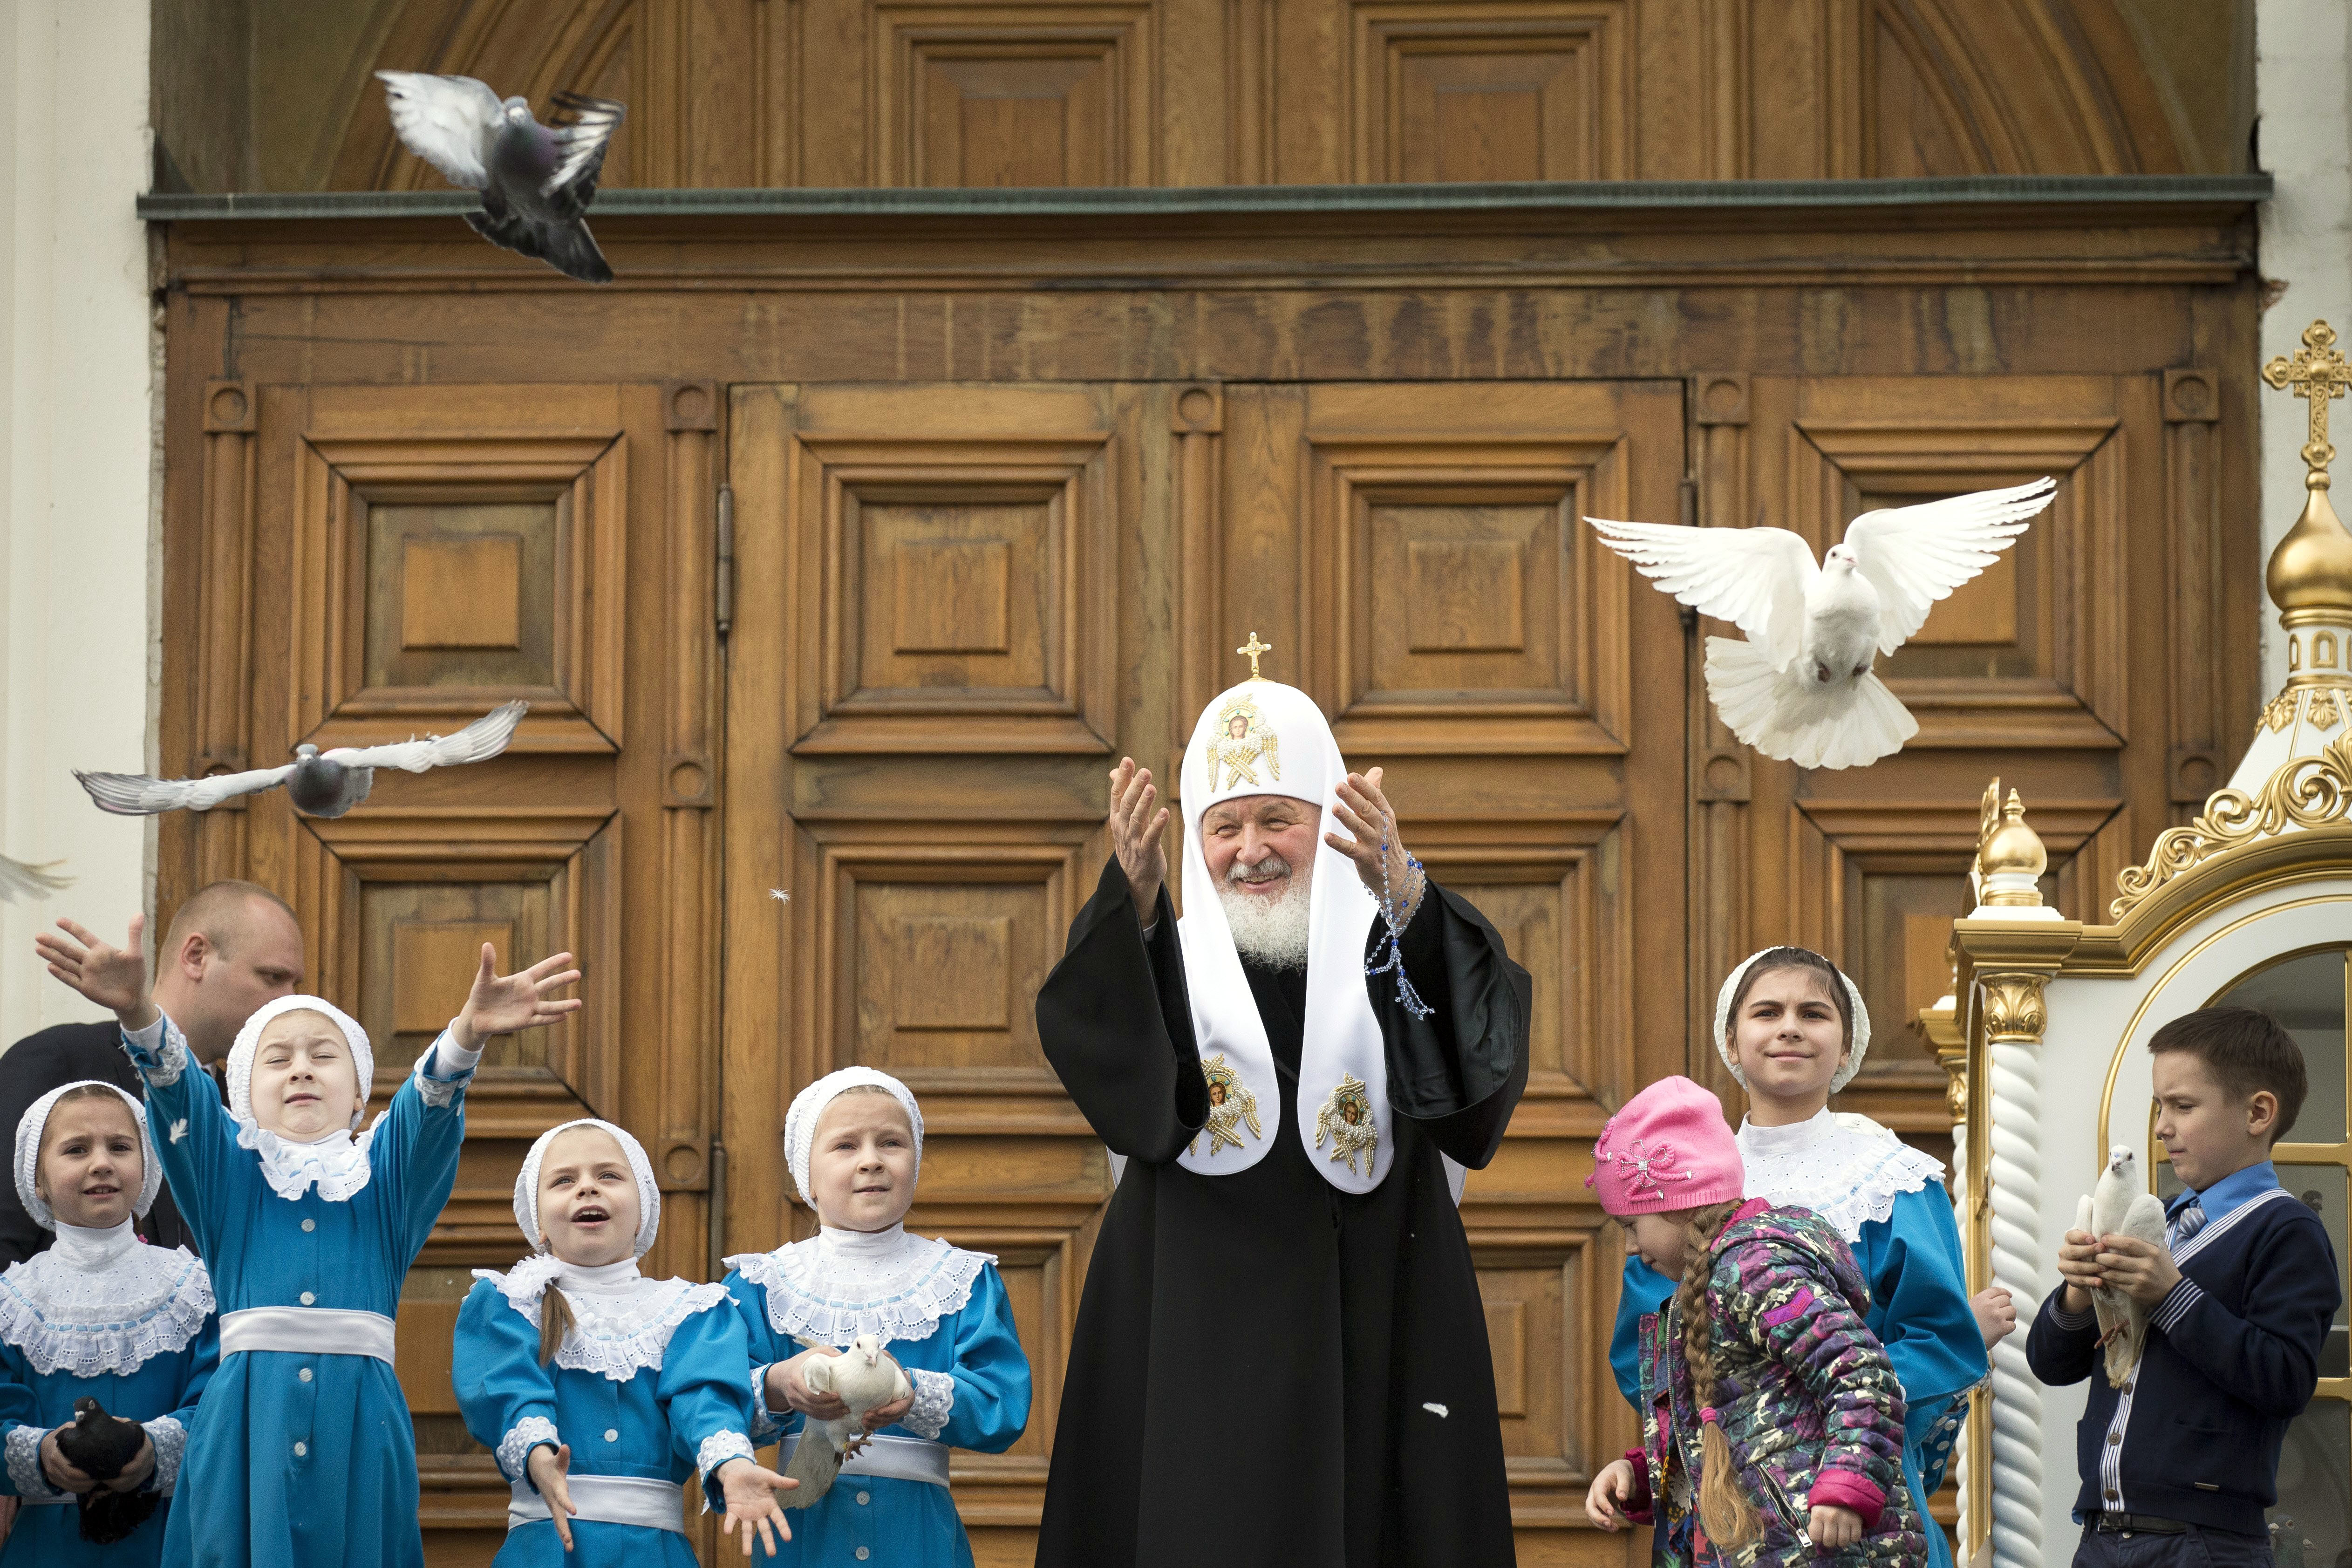 Russian Orthodox Church Patriarch Kirill, center, releases birds at Annunciation Cathedral in the Moscow's Kremlin in Moscow, Russia, Friday, April 7, 2017, to mark the Russian Orthodox holiday of the Annunciation. (AP Photo/Alexander Zemlianichenko)